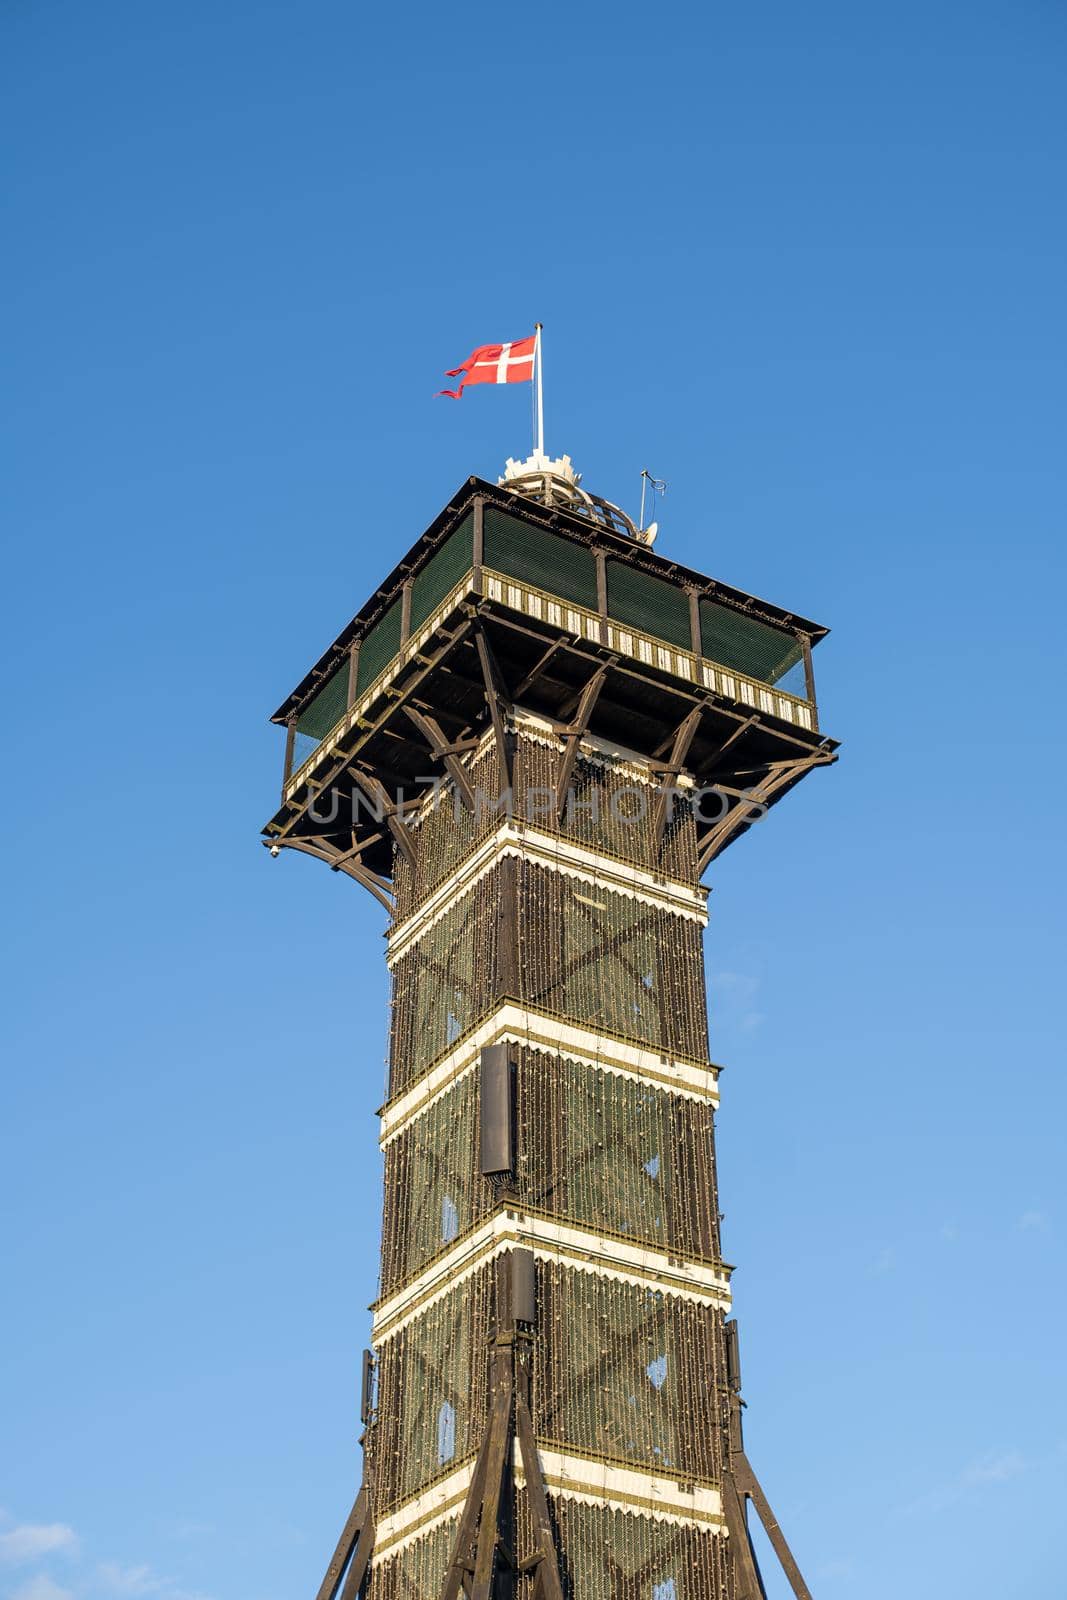 Copenhagen, Denmark - January 03, 2021: The observational tower in Copenhagen Zoo. Copenhagen Zoo is was founded in 1859 and is one of the oldest zoos in Europe.